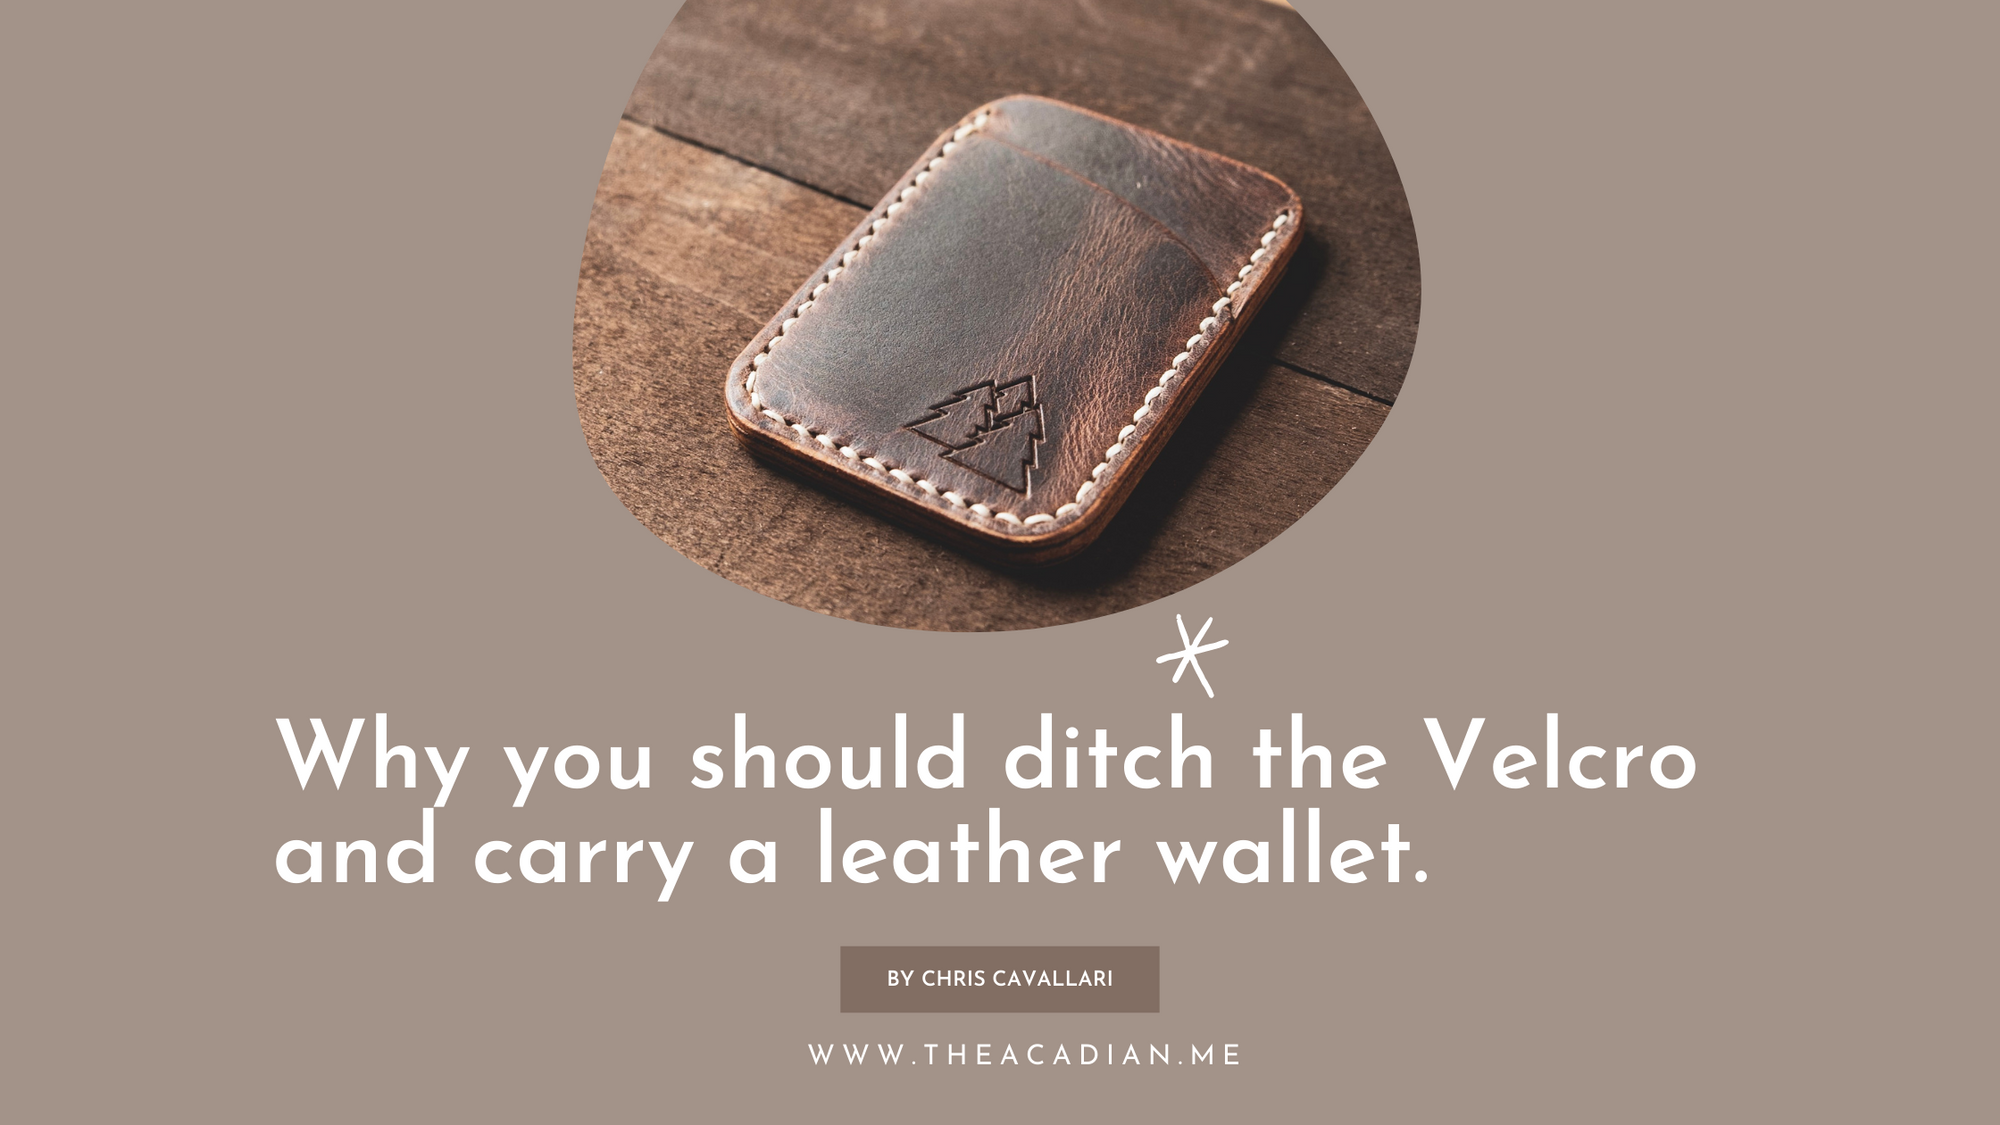 Why you should ditch the velcro and sport a handmade leather wallet.